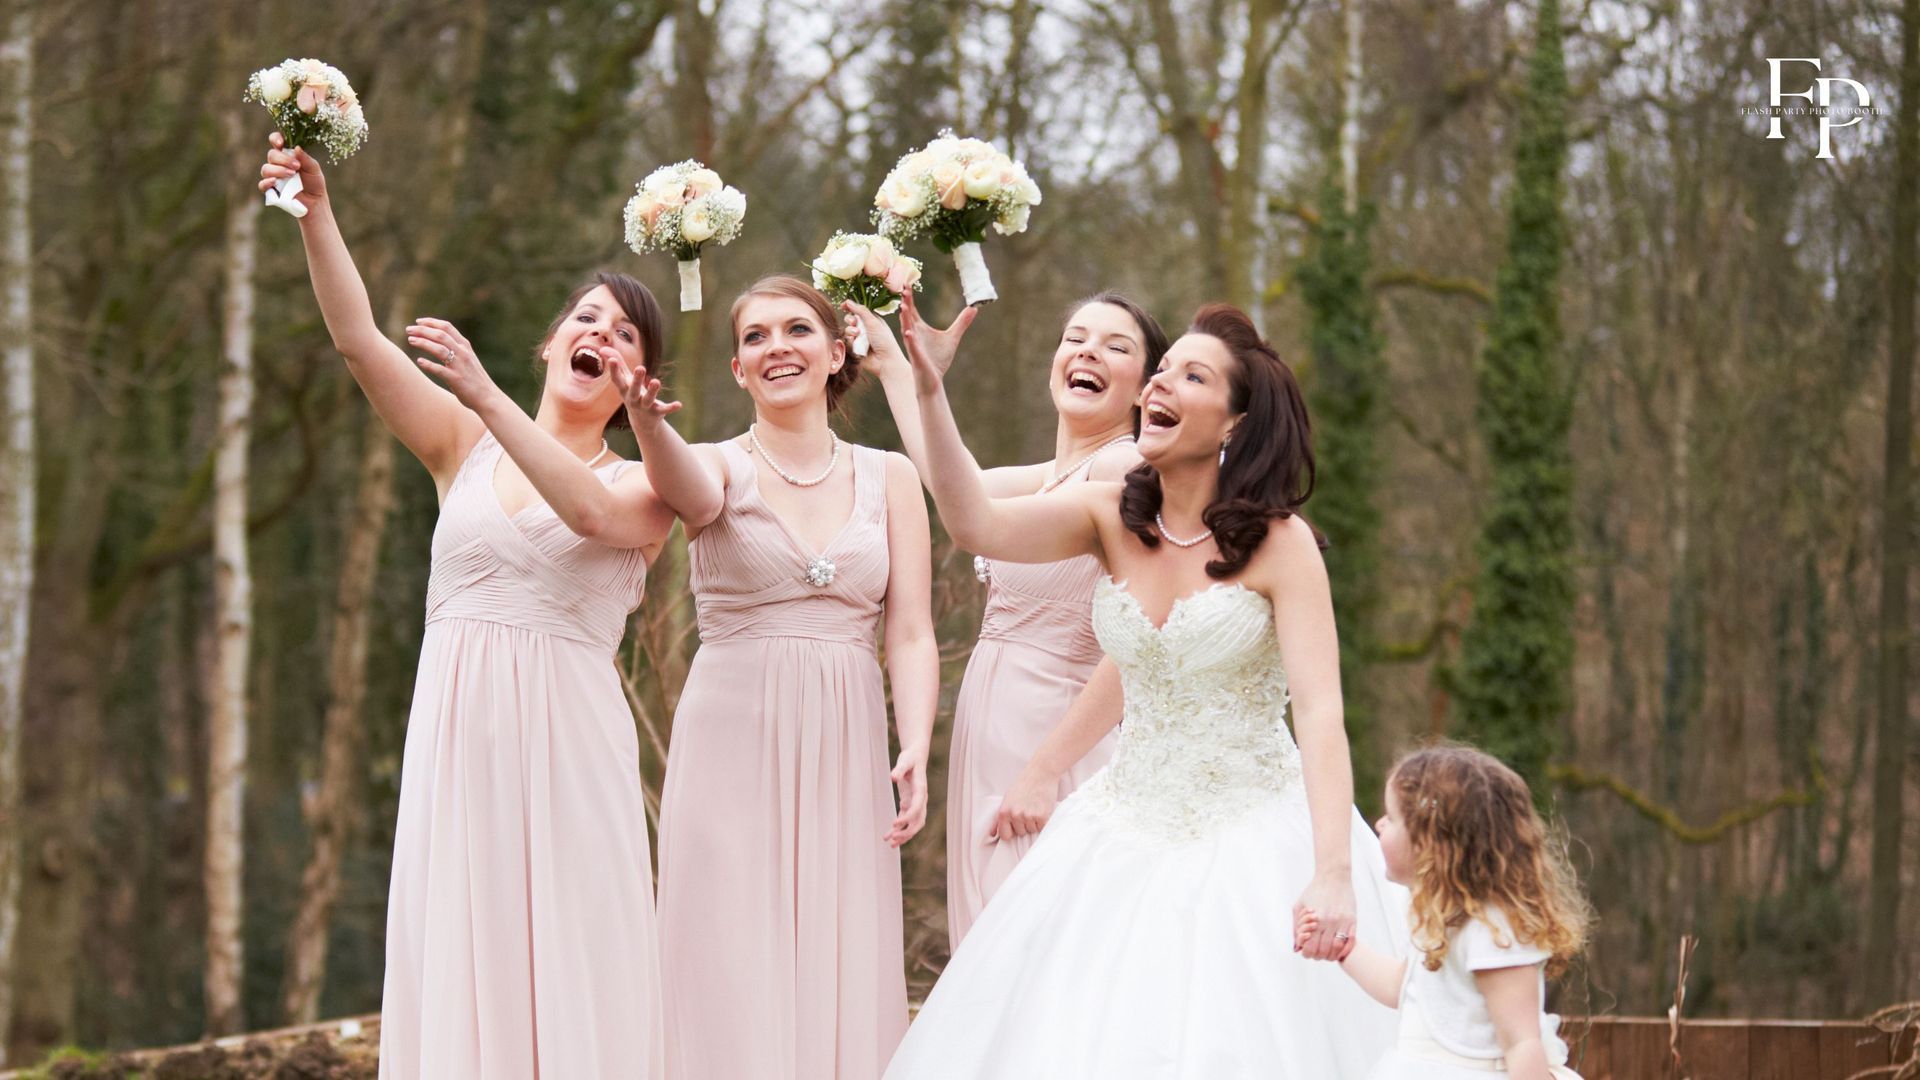 Bride and bridesmaids in Atlanta playfully toss their bouquets in the air.